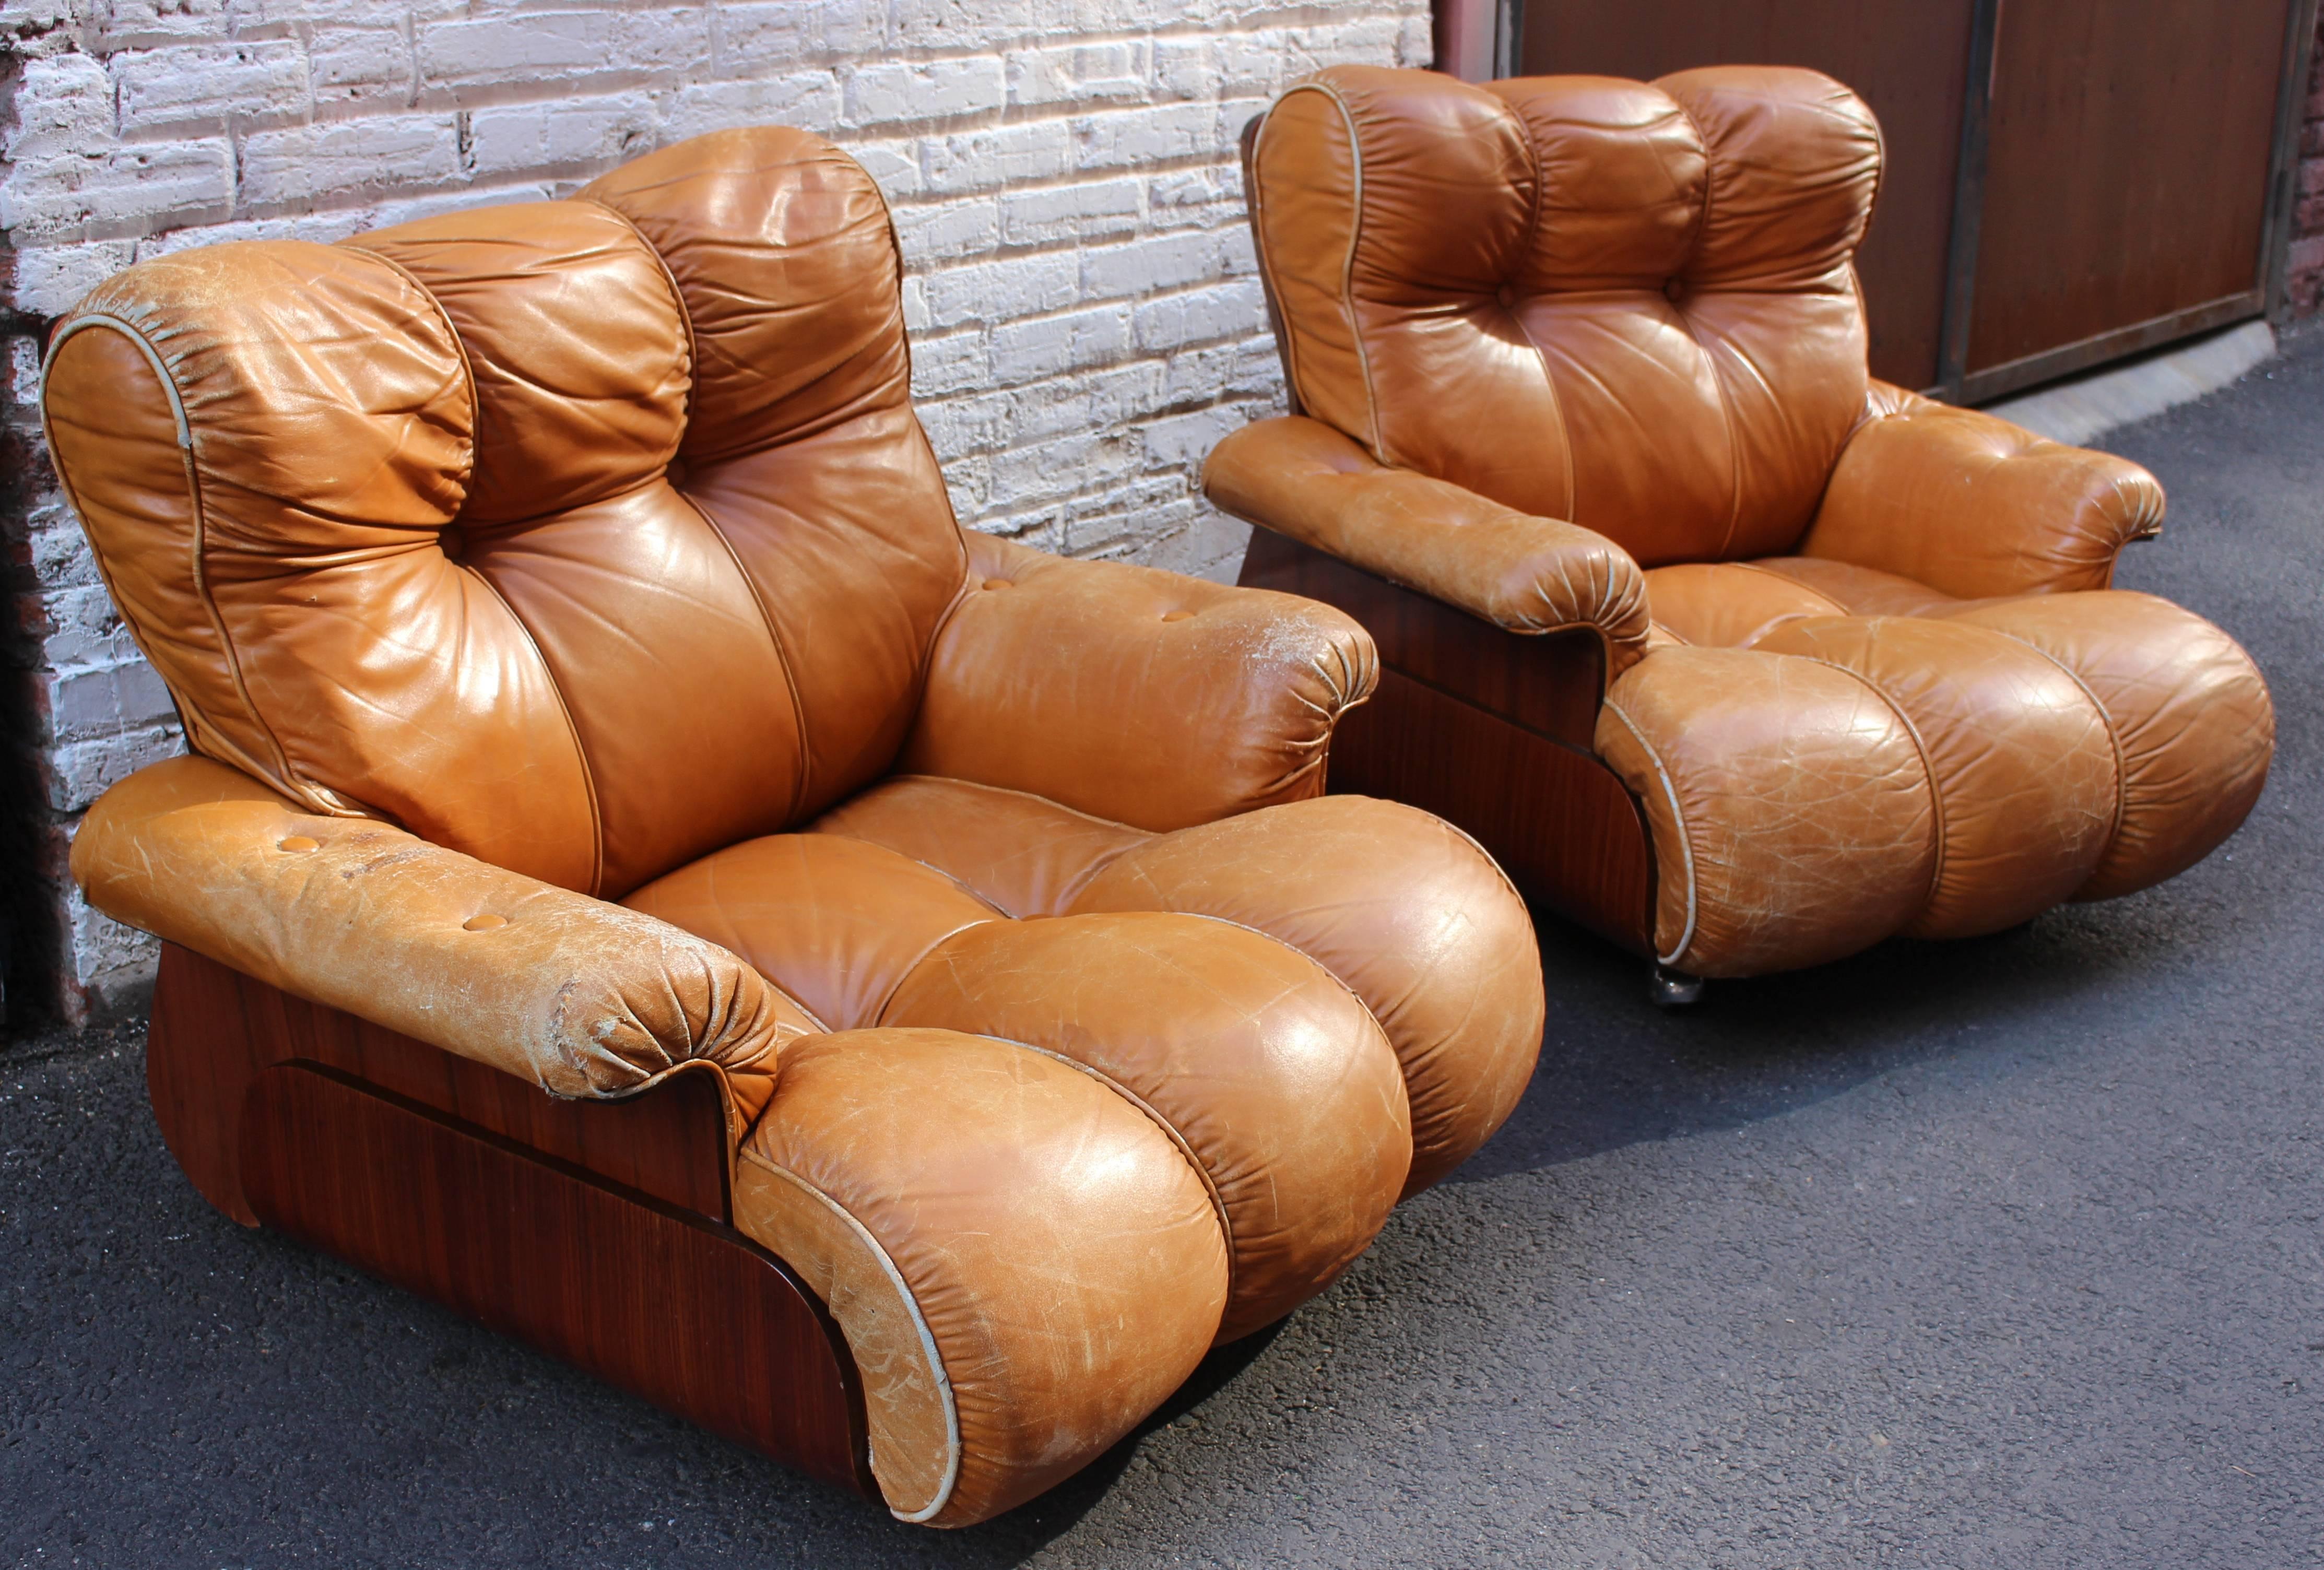 1970s Brazilian pair of leather lounge chairs. Brazilian cherry wood base and very comfortable. 

Pls note: Item is located in Beverly Store
7274 Beverly Blvd 
Los Angeles, CA 90036
